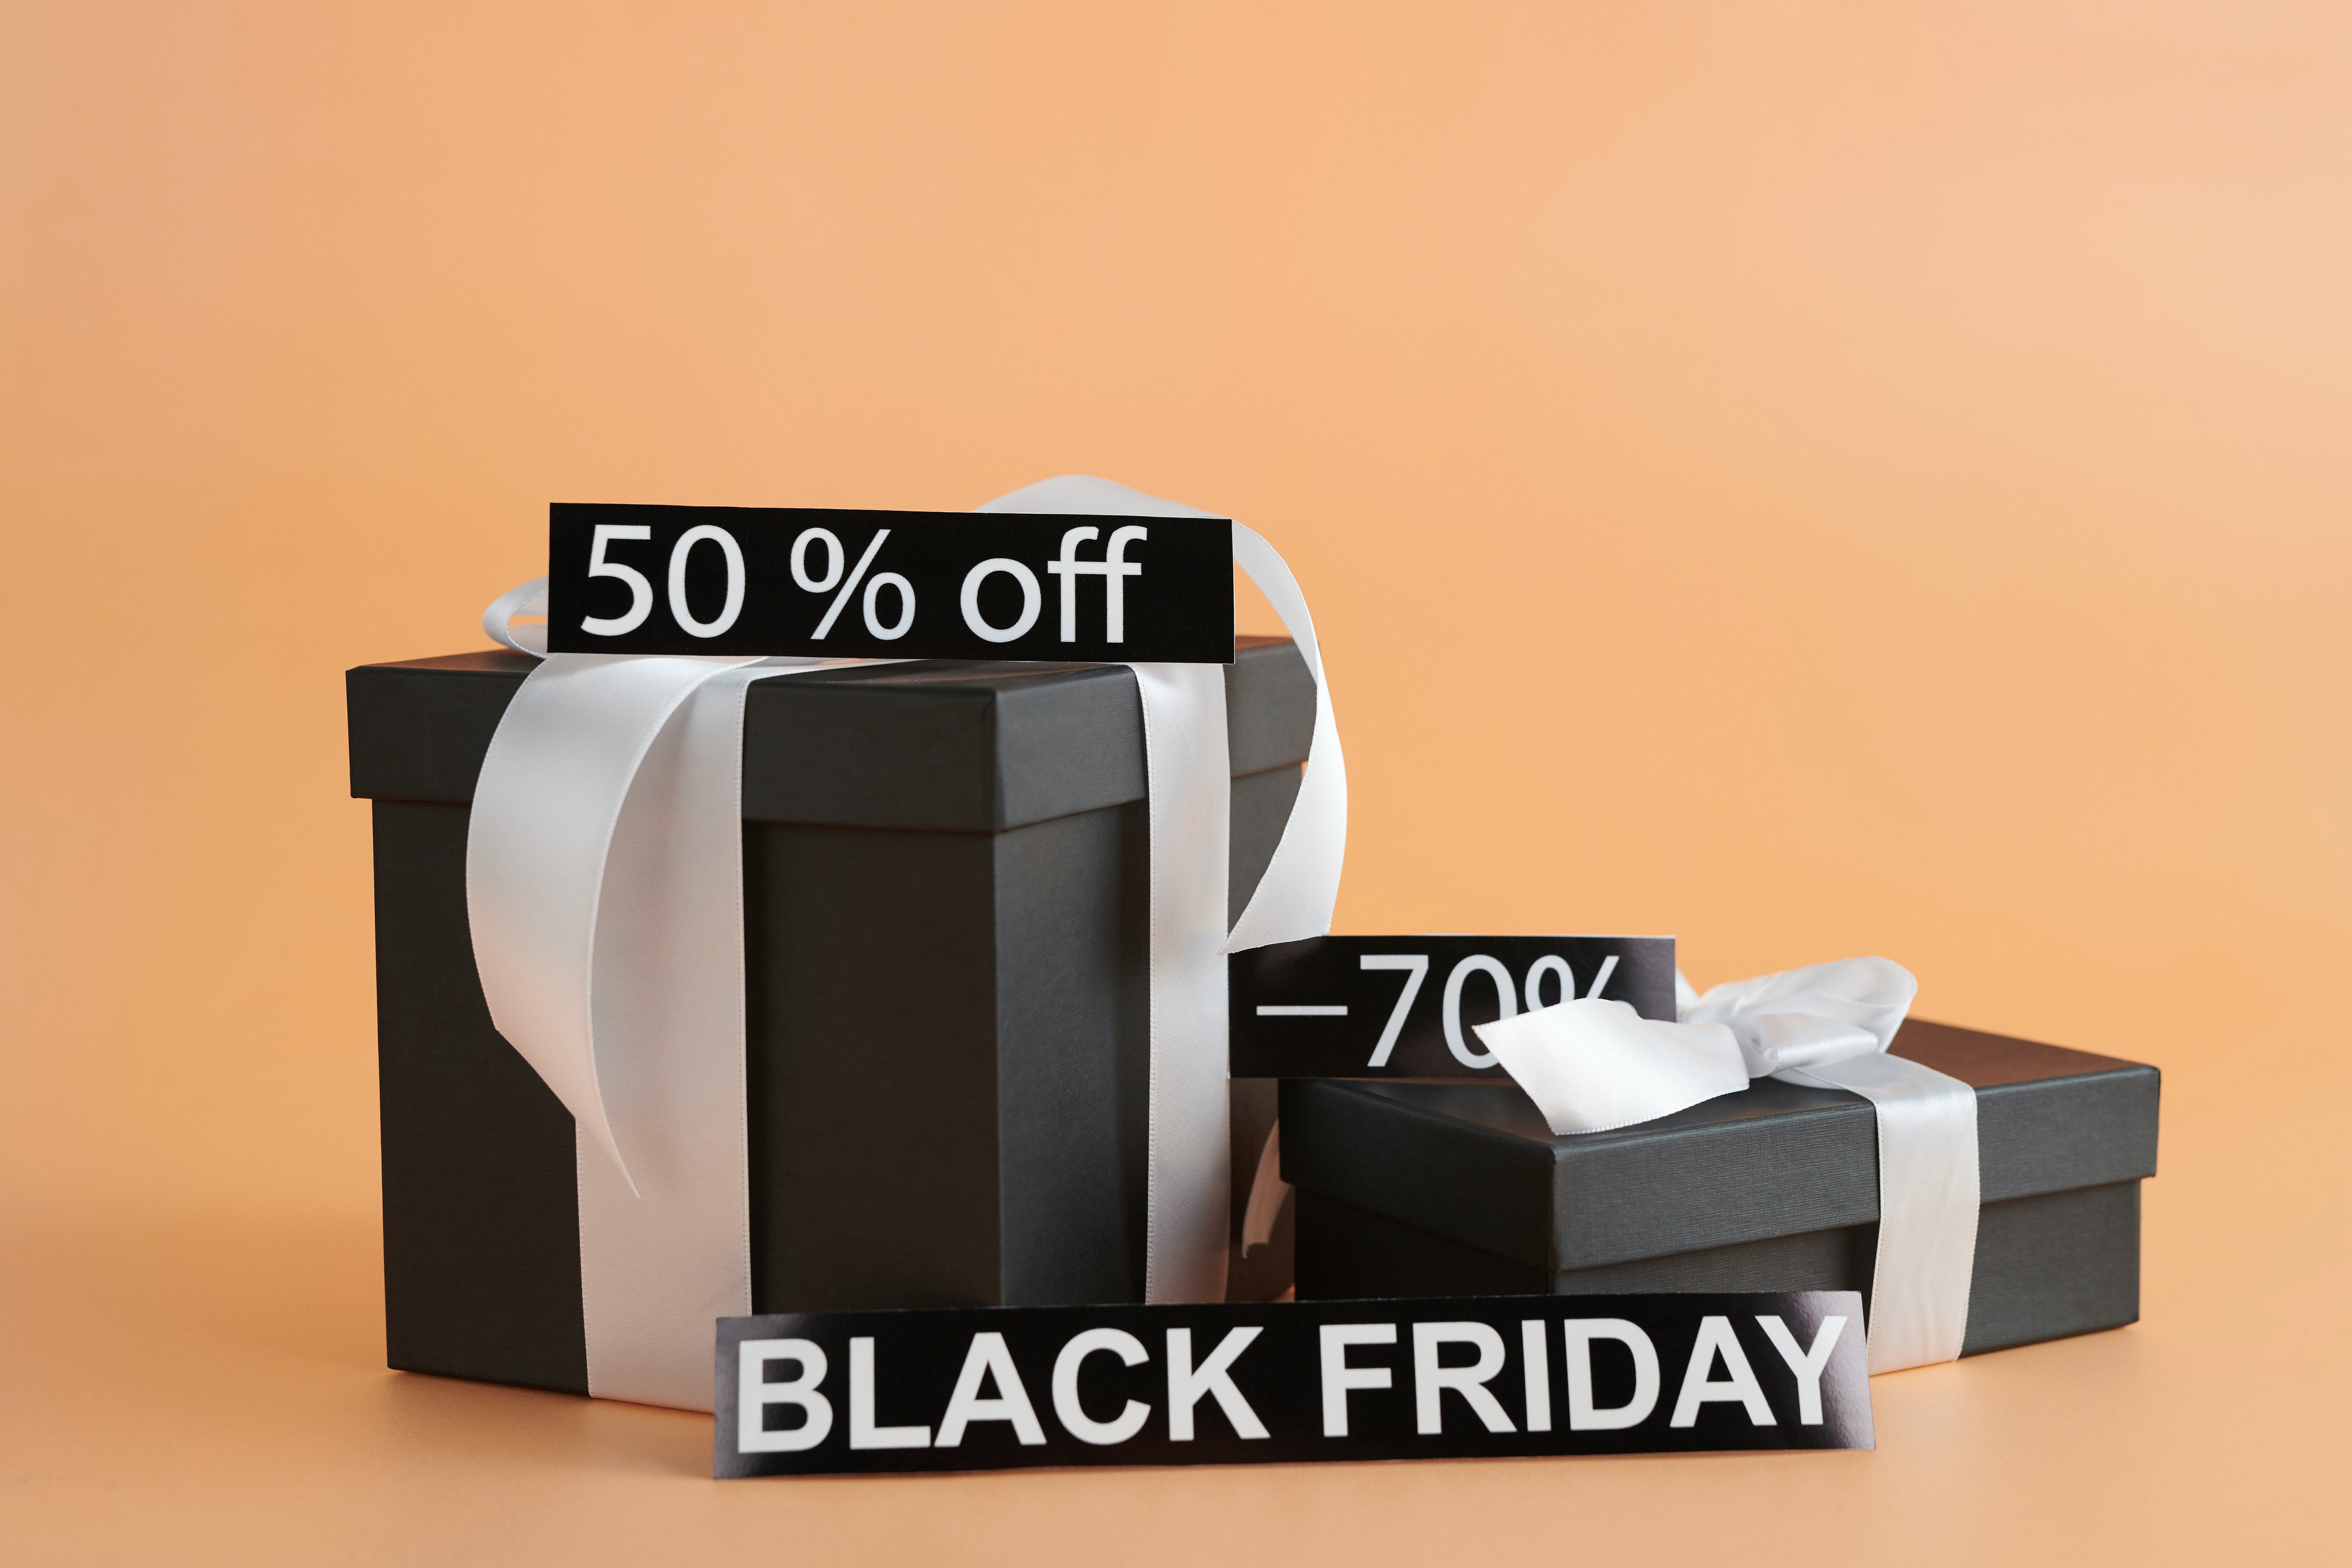 Black Friday, Cyber Monday, or Green Friday: what is still making sense?